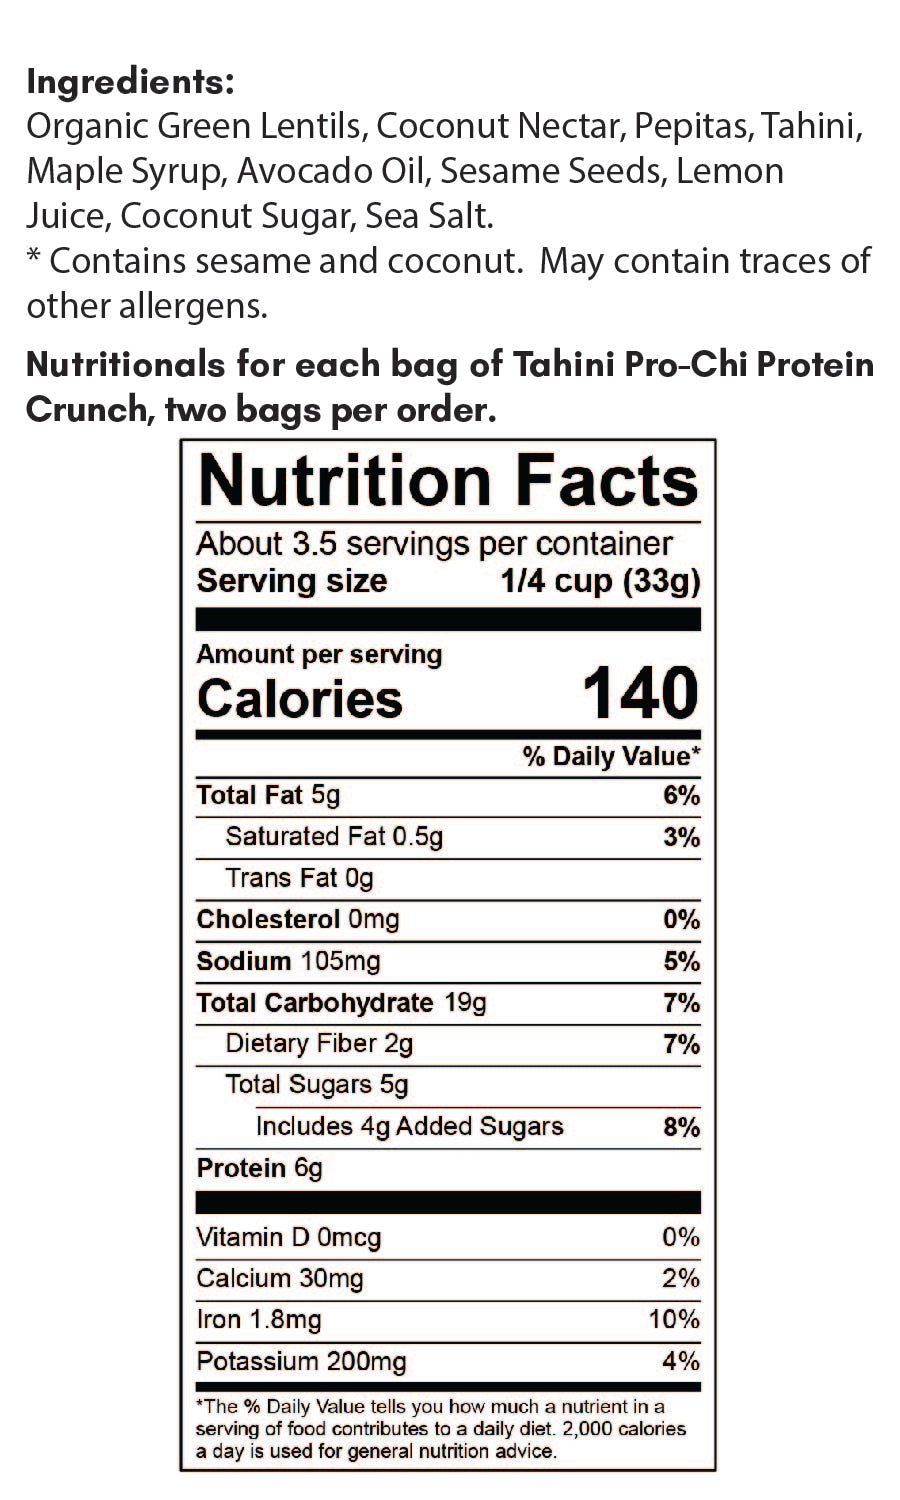 nutritionals for healthy lentil snack Pro-Chi Protein Crunch